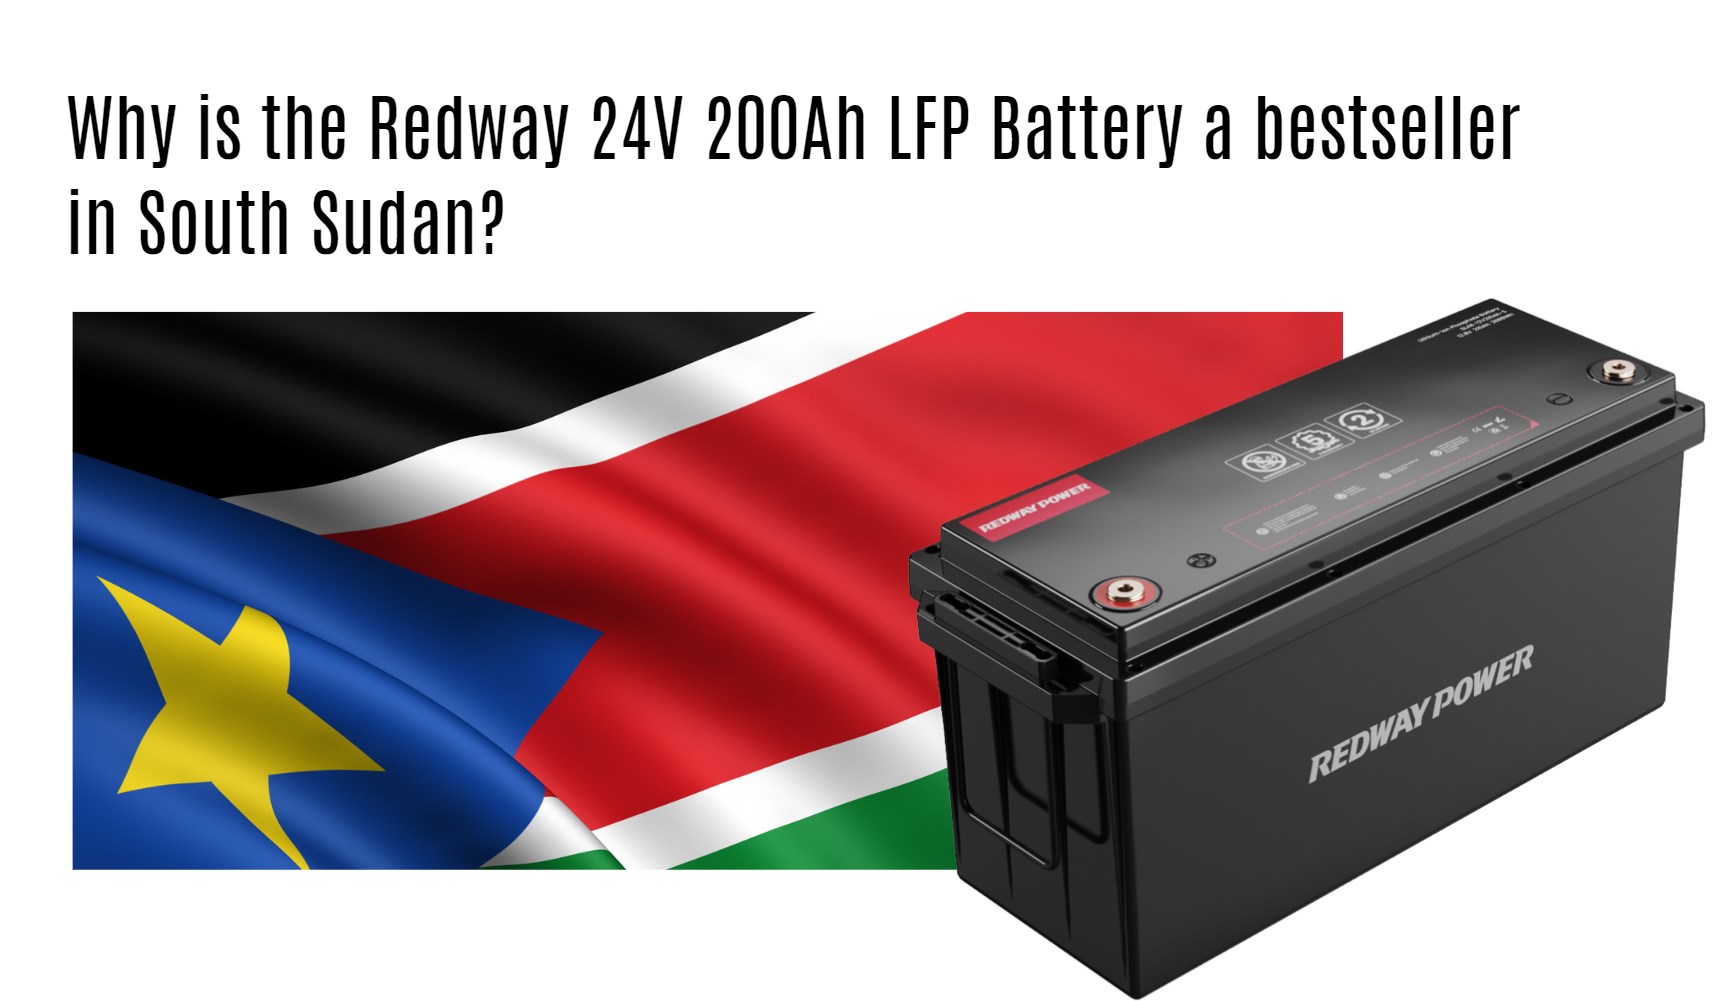 Why is the Redway 24V 200Ah LFP Battery a bestseller in South Sudan?